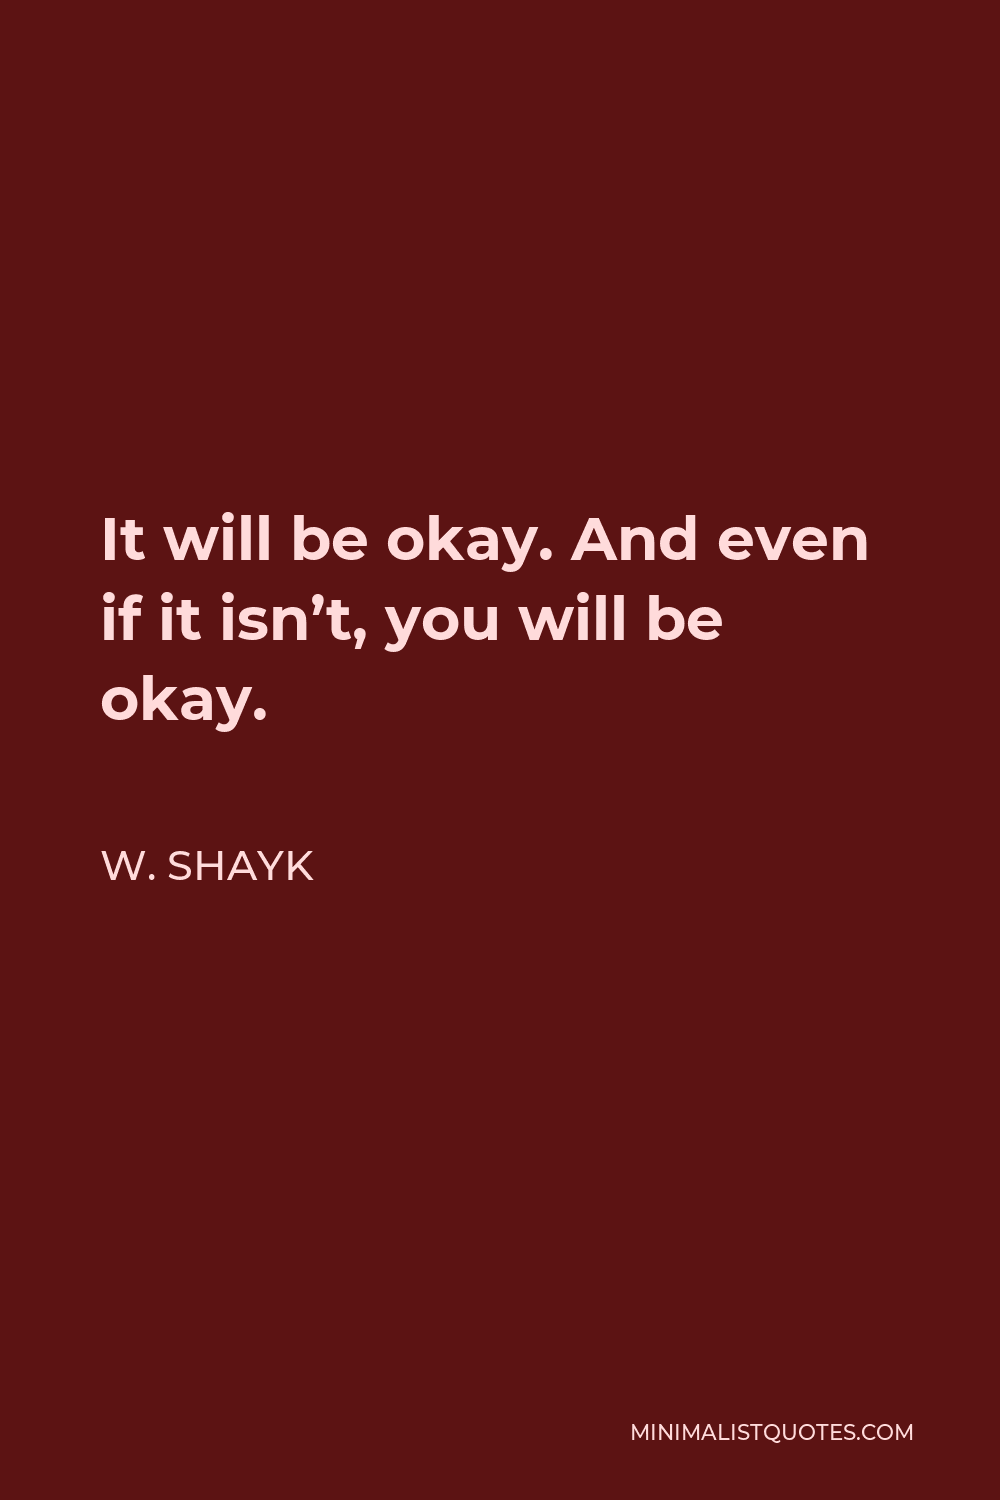 W. Shayk Quote - It will be okay. And even if it isn’t, you will be okay.